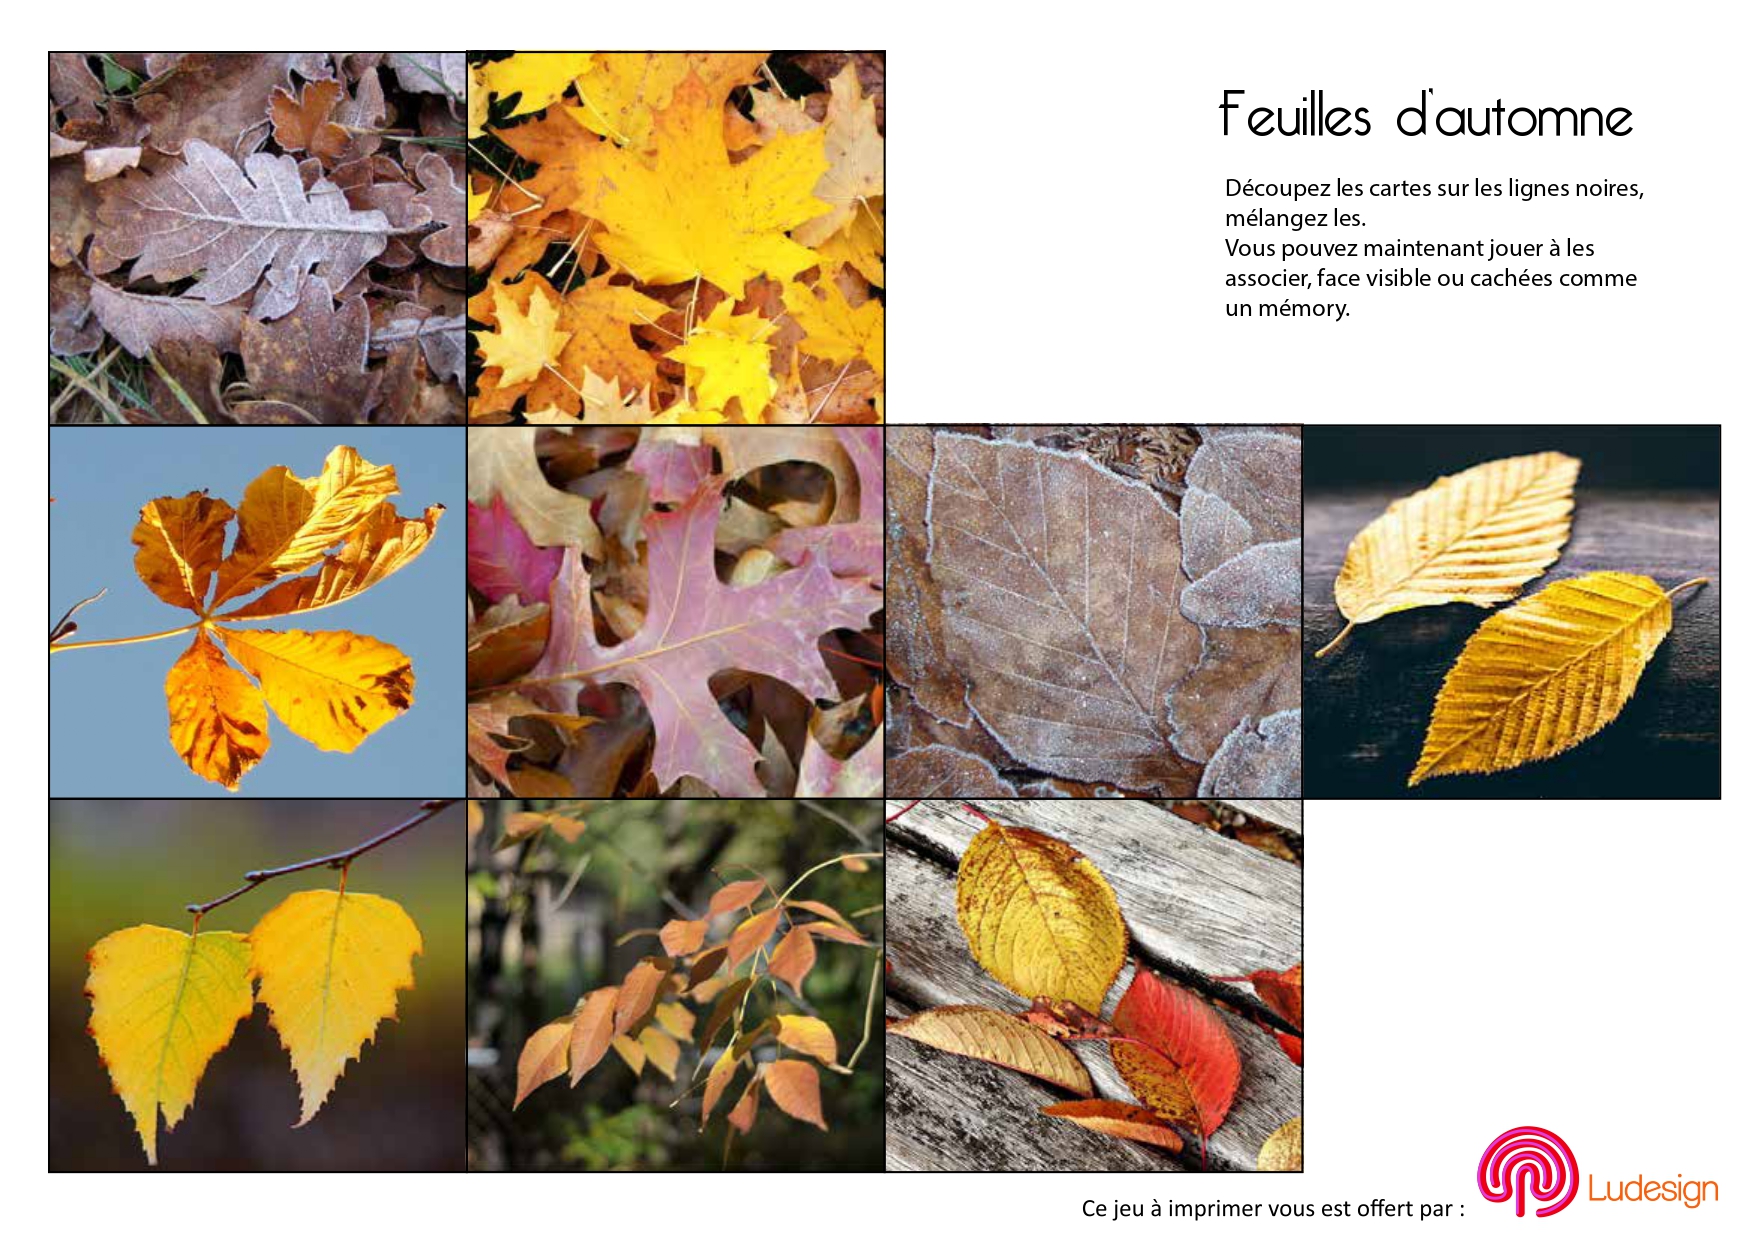 feuilles dautomne1 page 0001